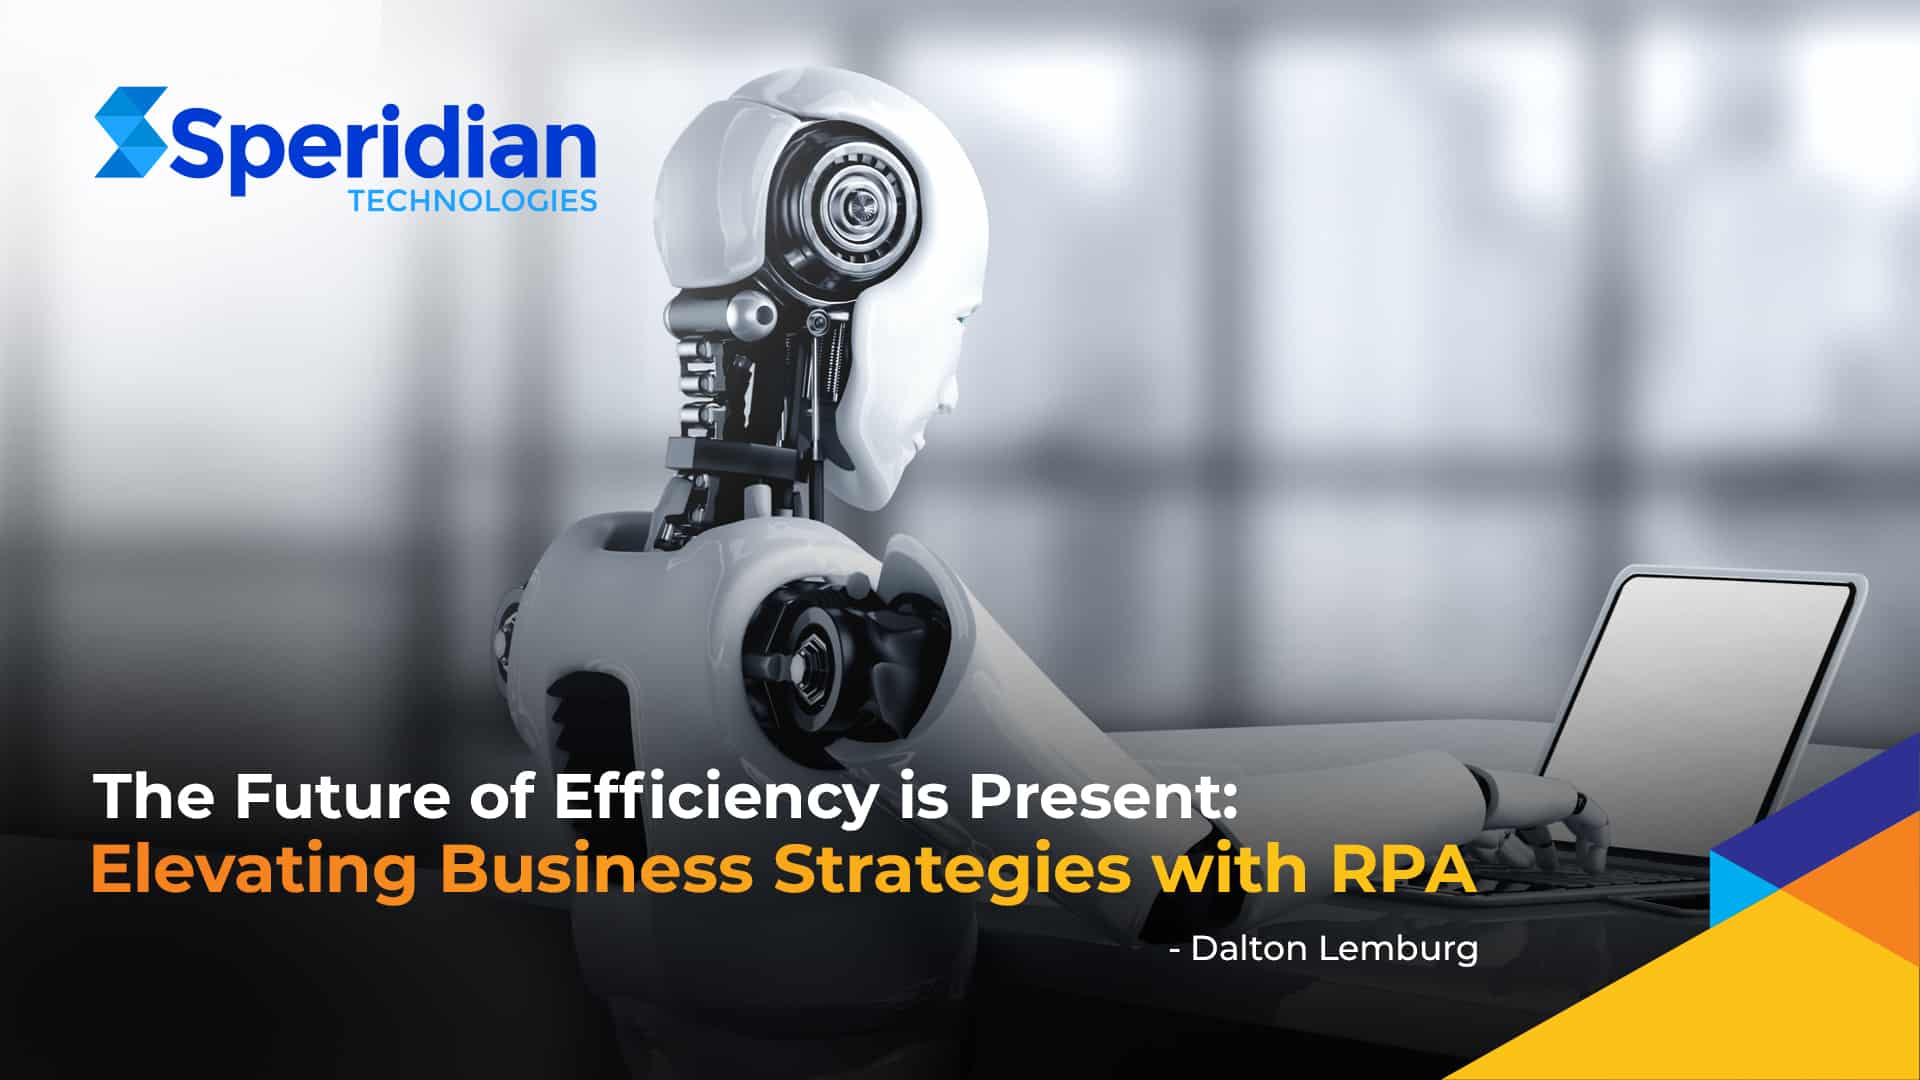 The Future of Efficiency is Present: Elevating Business Strategies with RPA